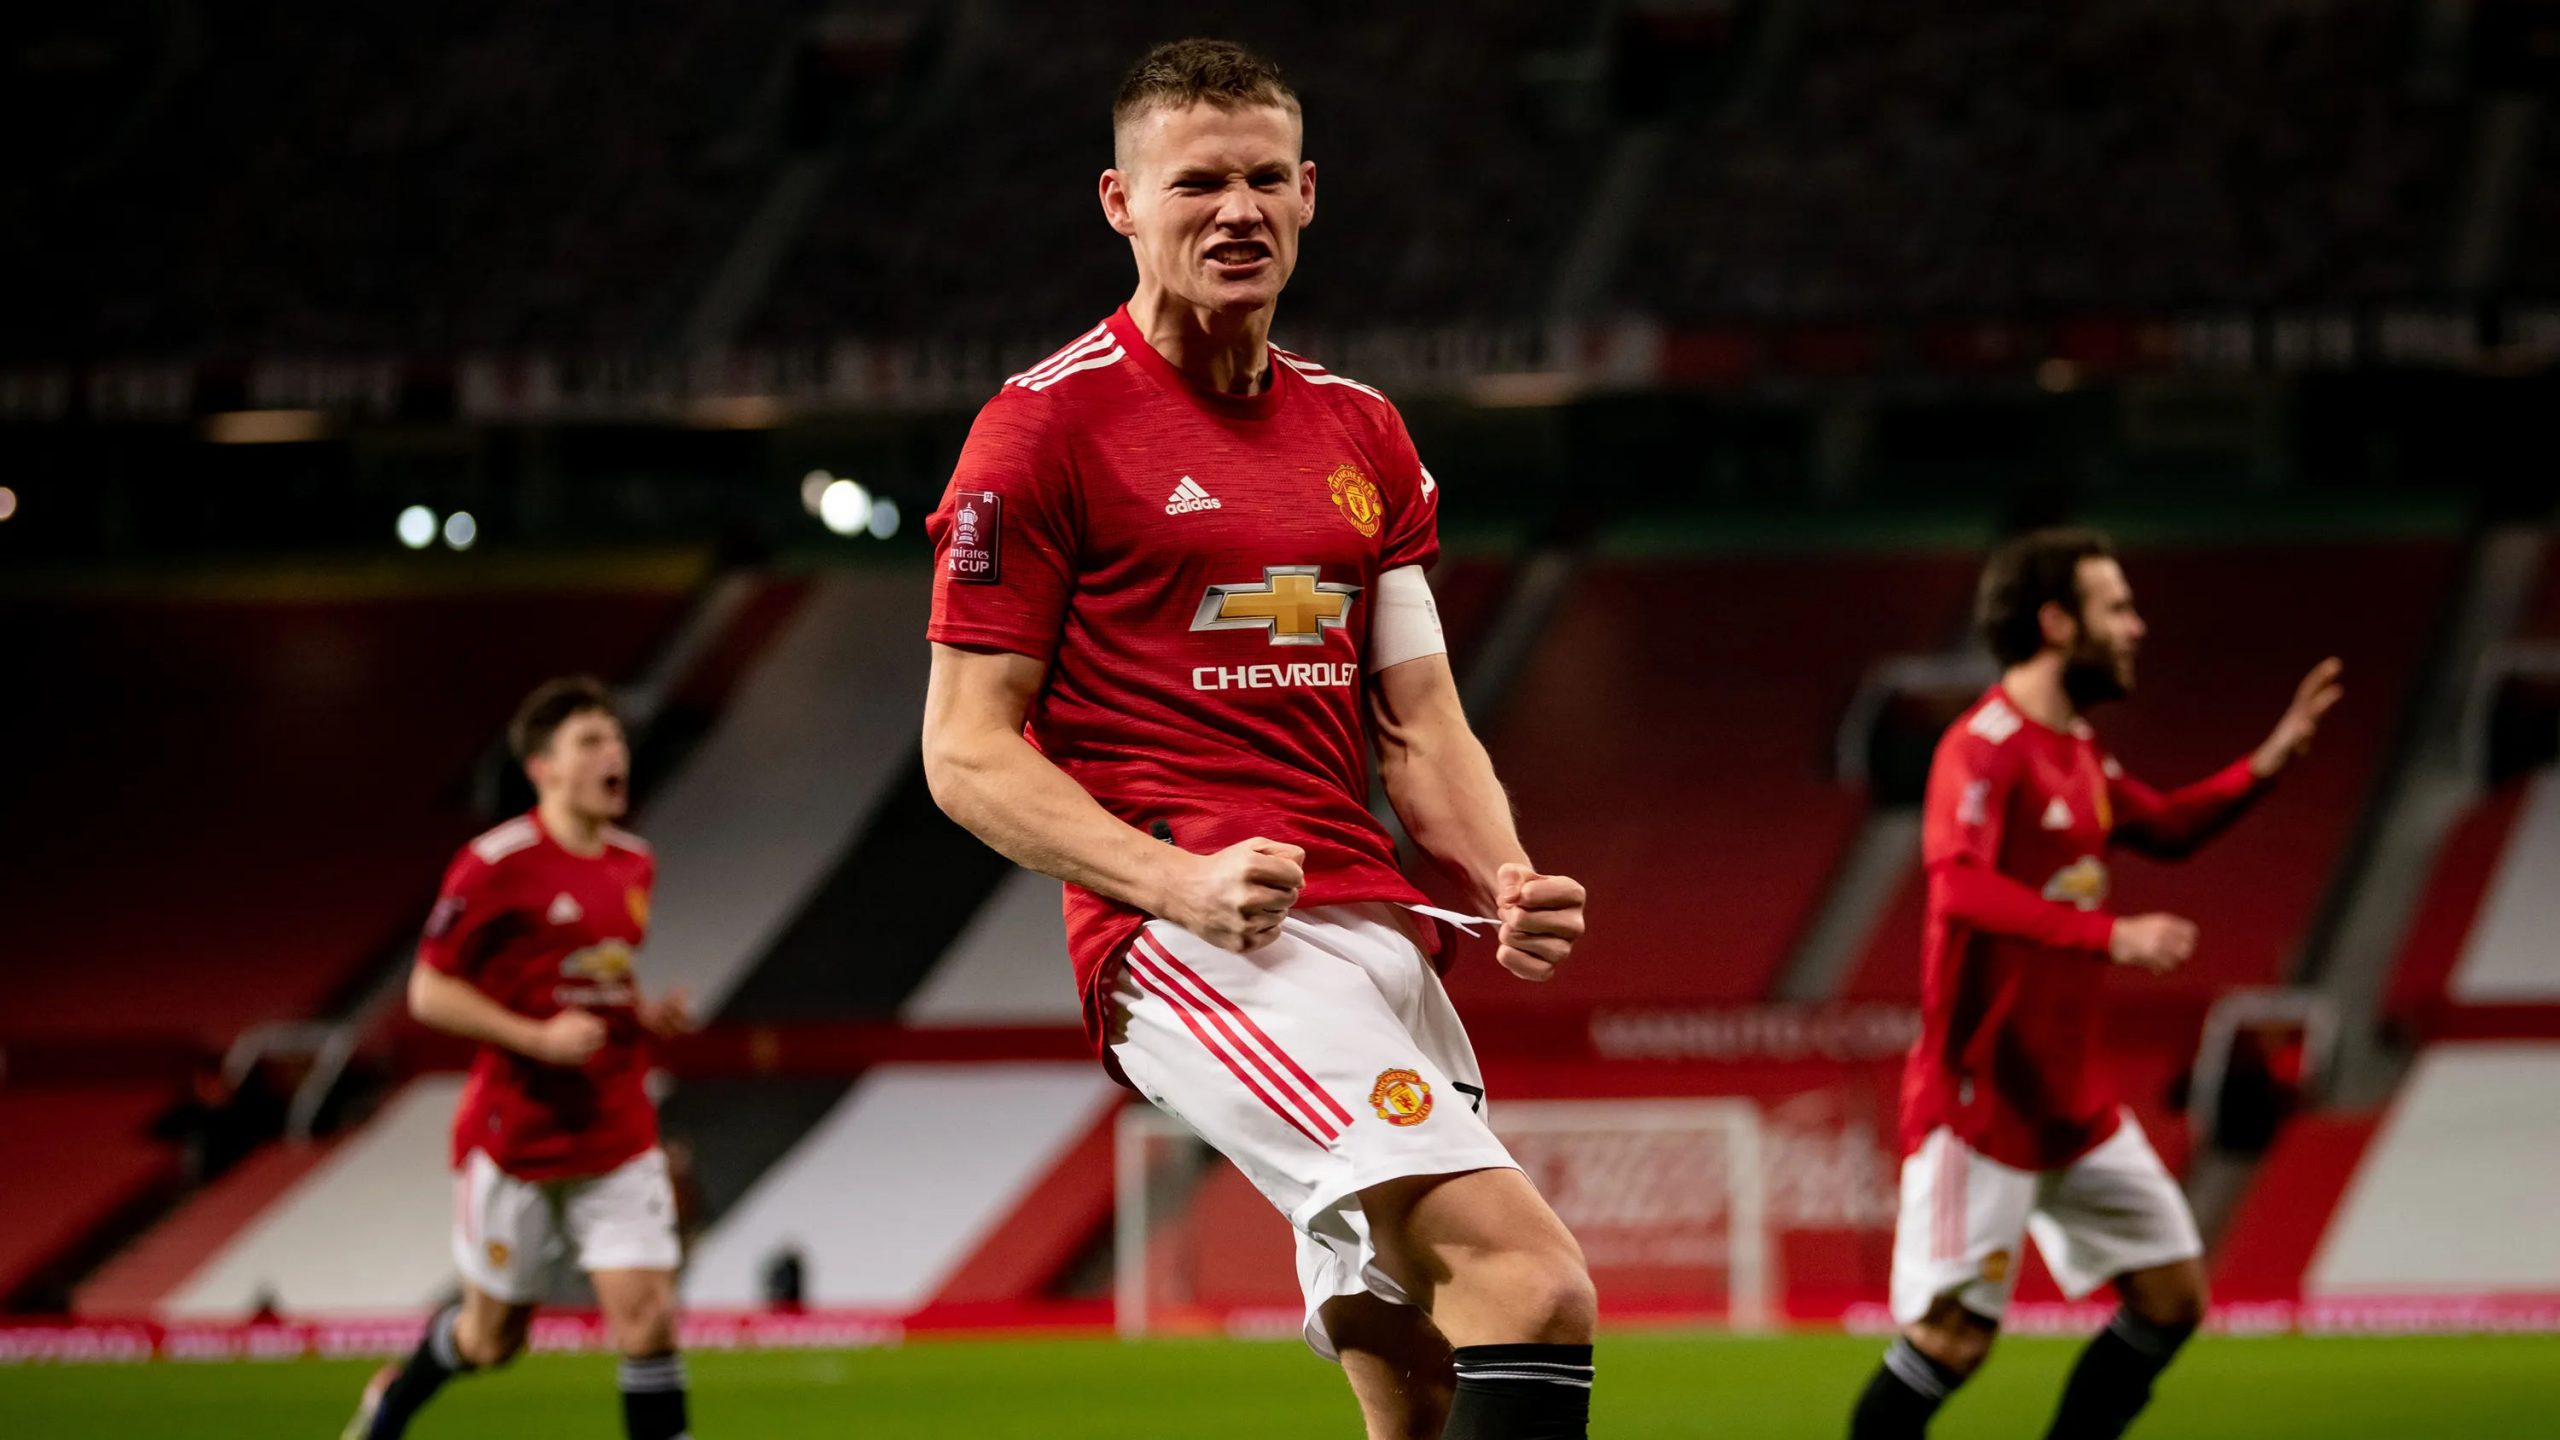 FA Cup: Scott McTominay scores on captaincy debut as Manchester United edge past Watford